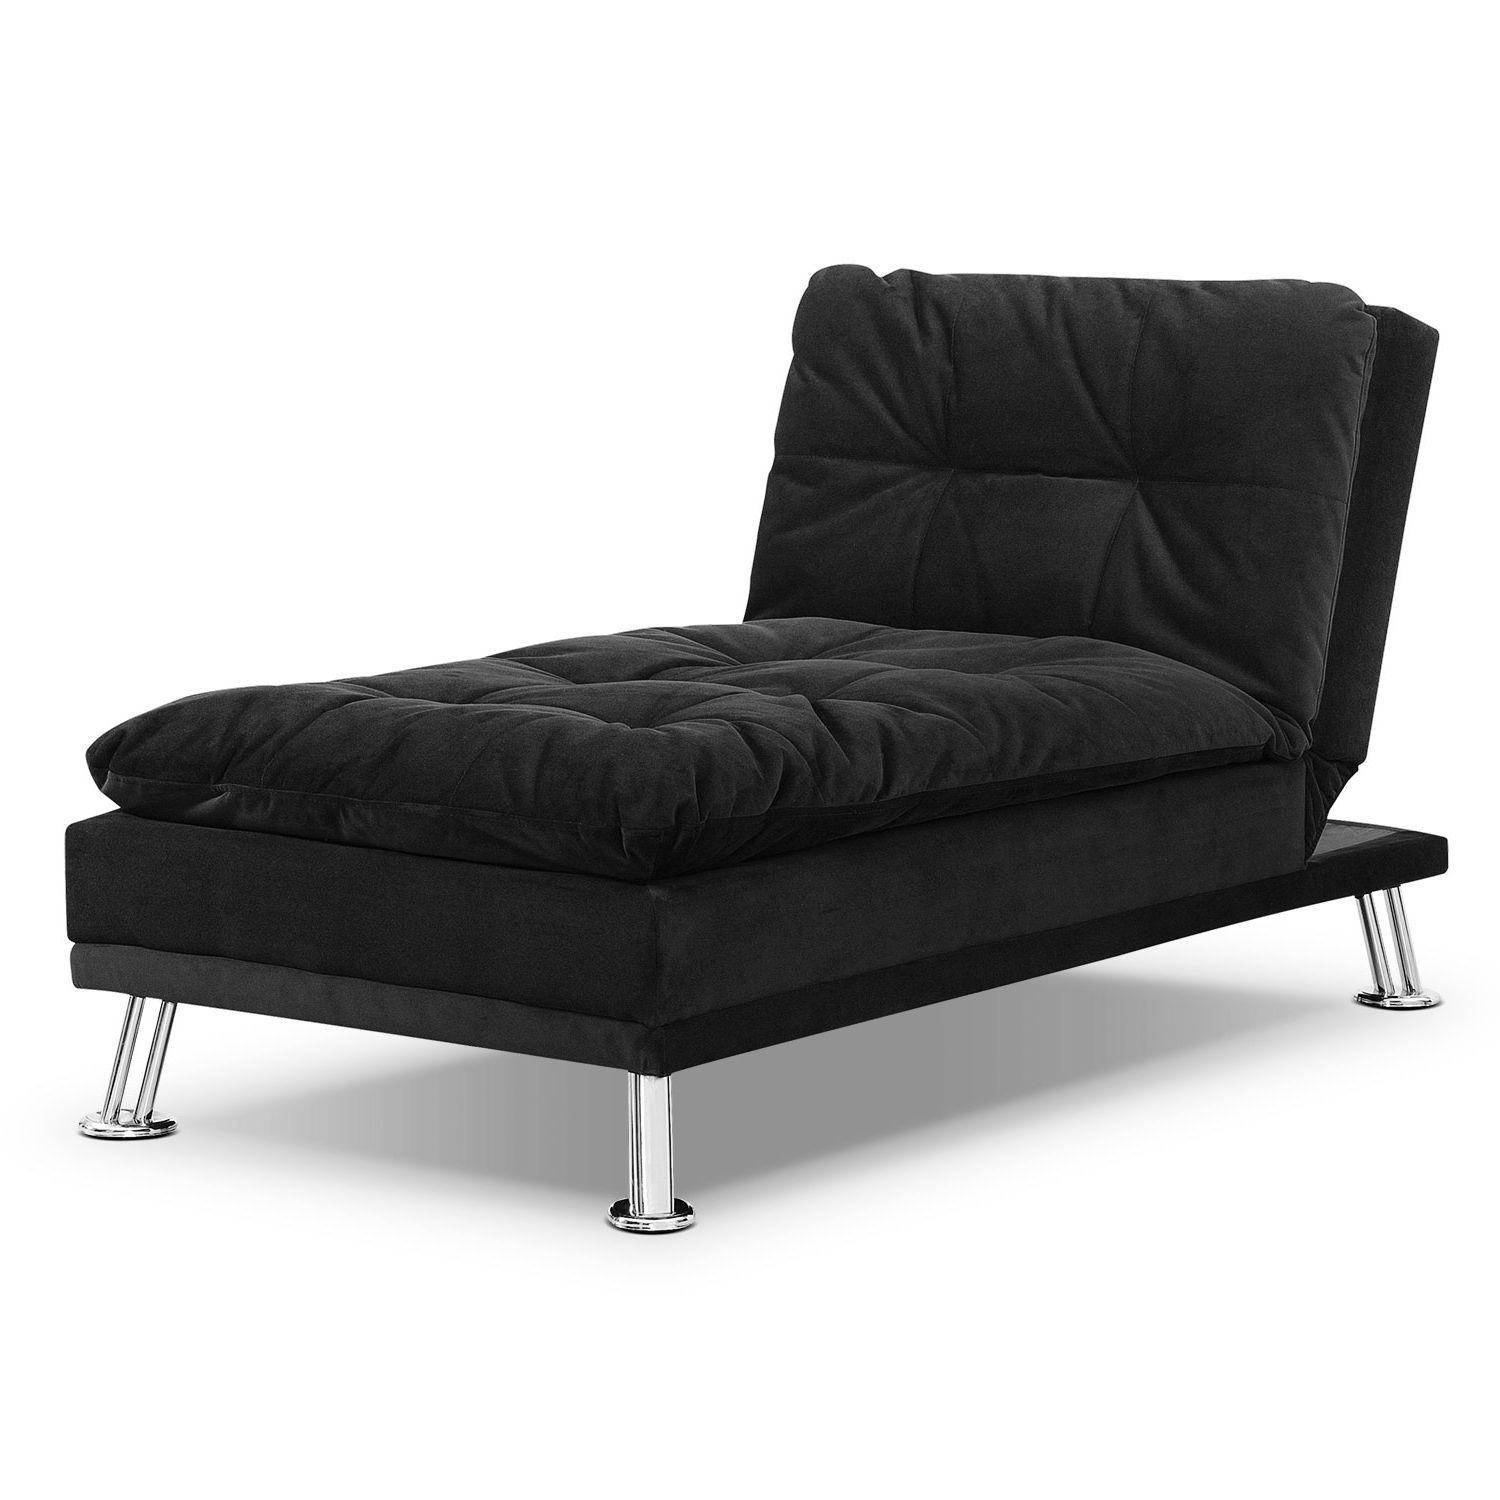 Value City Furniture In 2018 Chaise Beds (View 7 of 15)